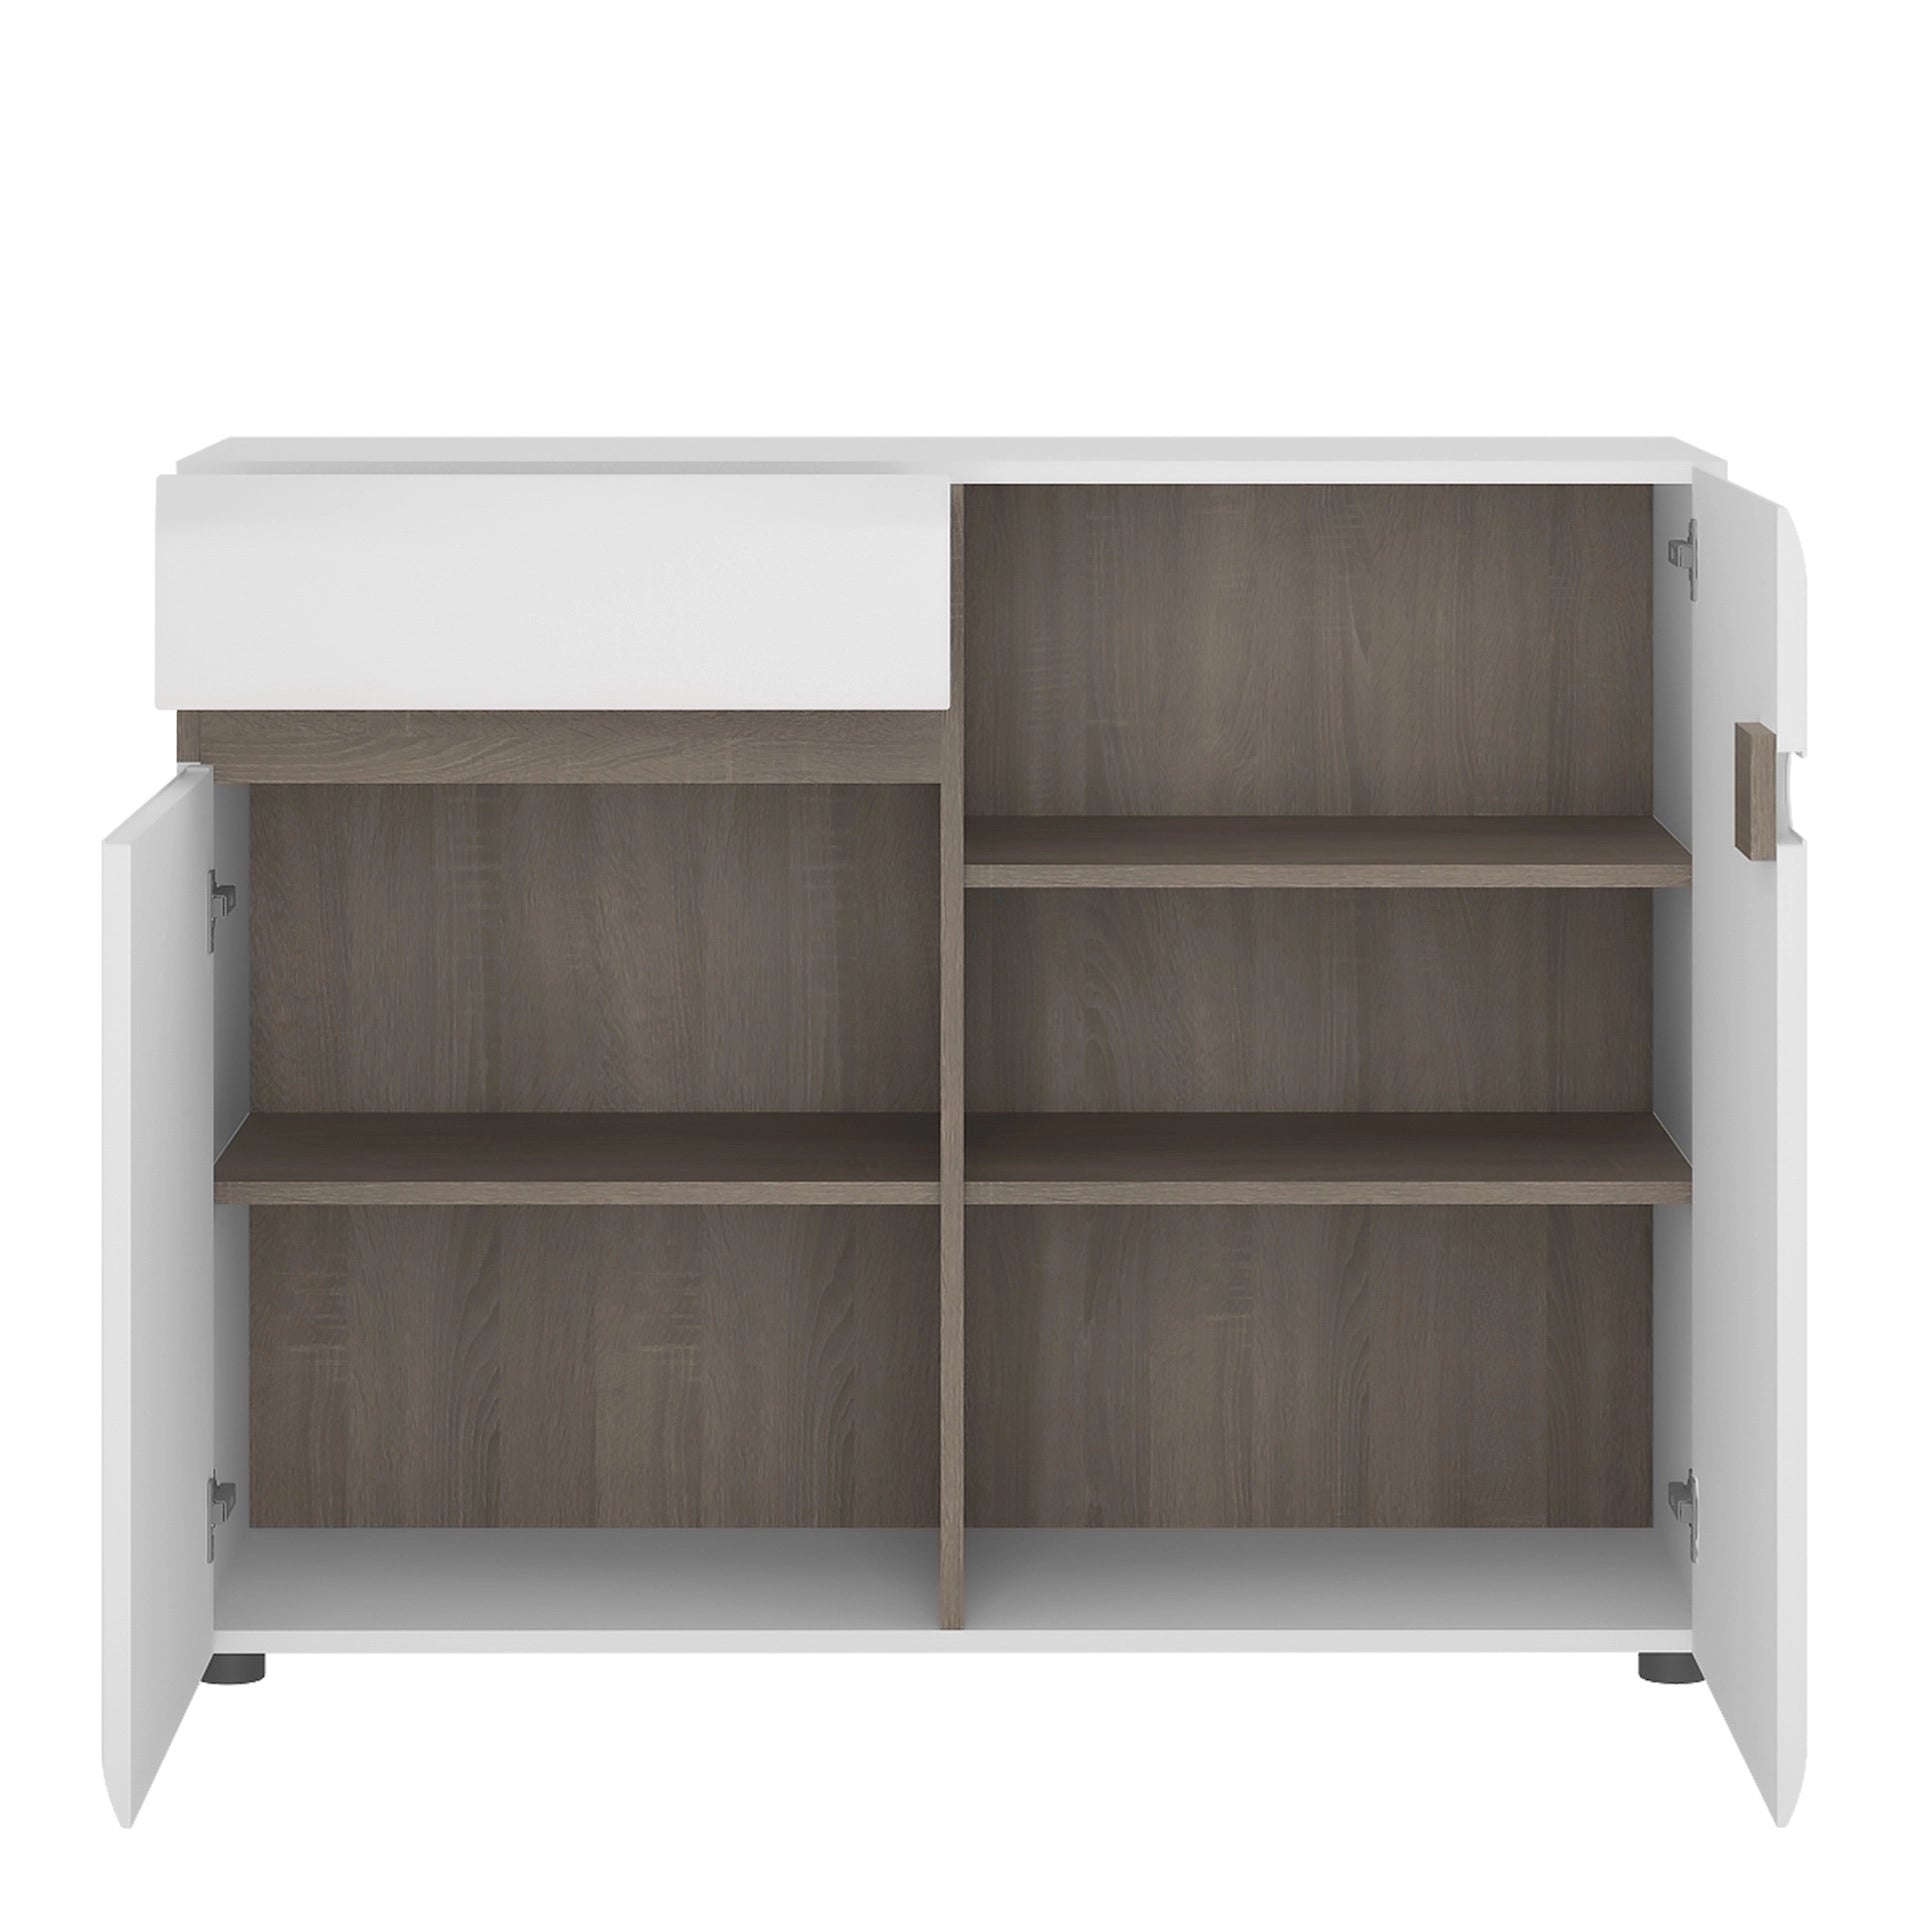 Furniture To Go Chelsea 1 Drawer 2 Door Sideboard 109.5cm Wide in White with Oak Trim